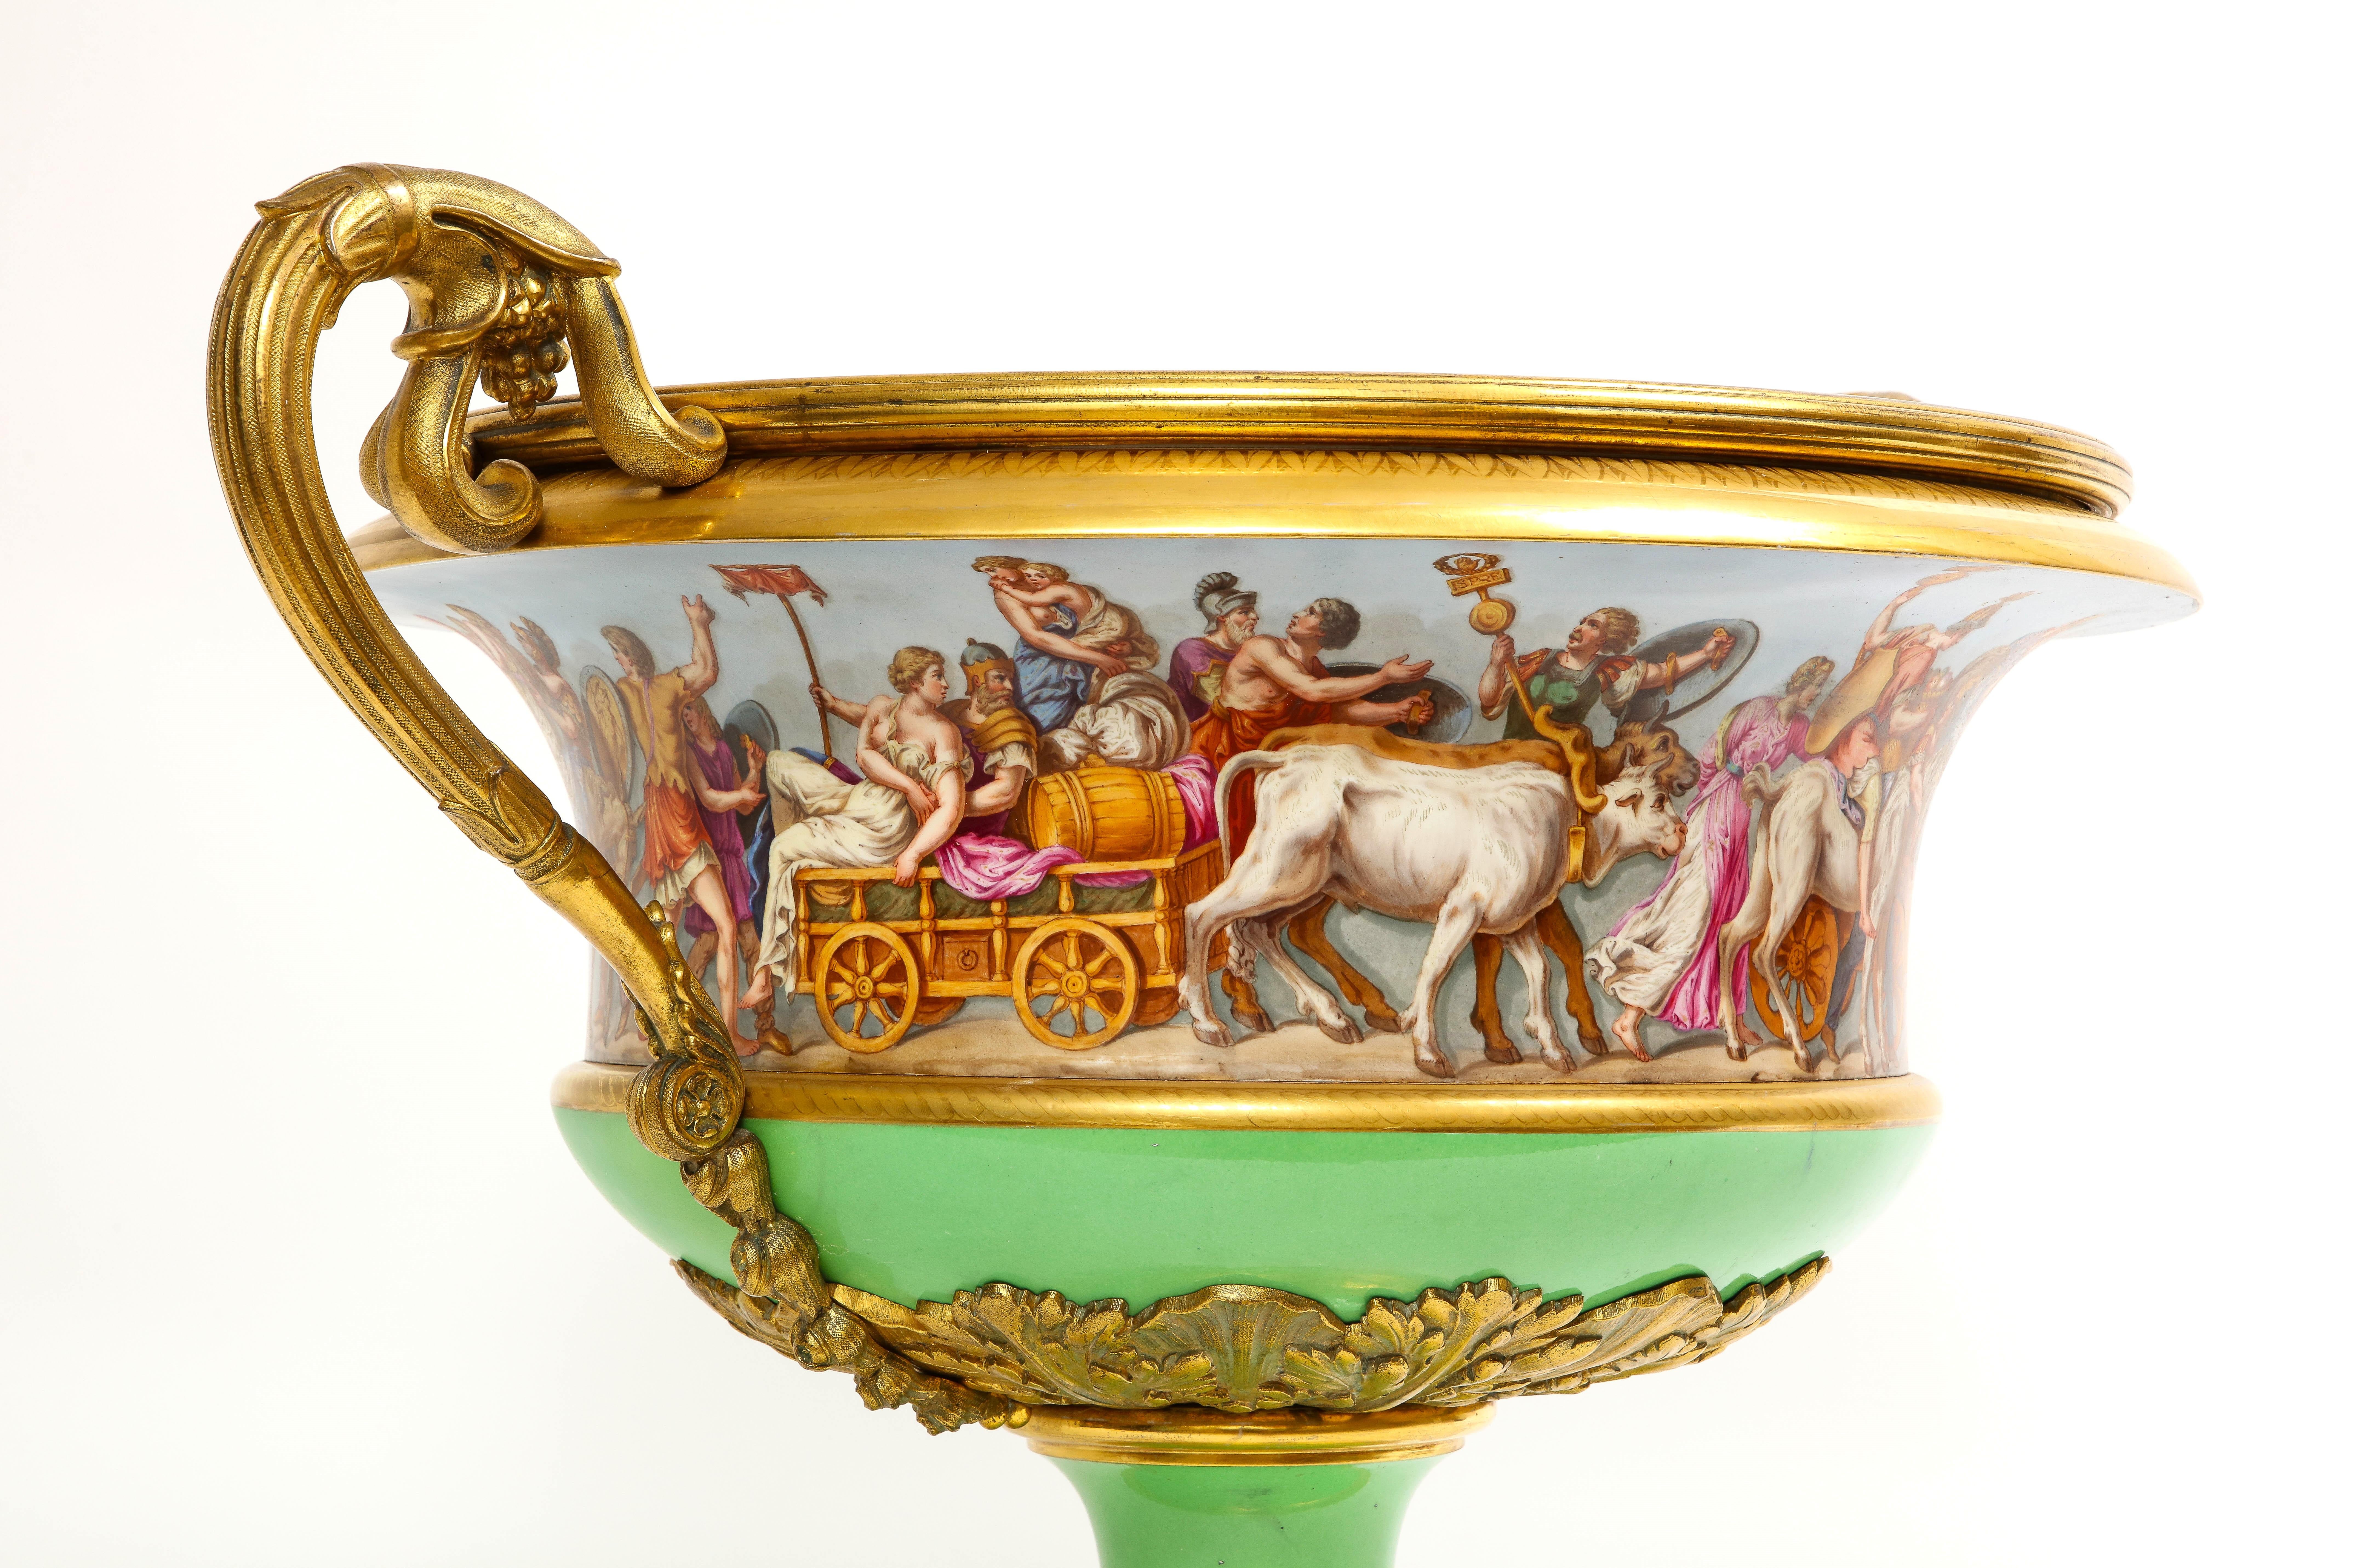 Mid-19th Century Monumental Sevres Porcelain Ormolu-Mounted 2-Handle Campana Form Centerpiece For Sale